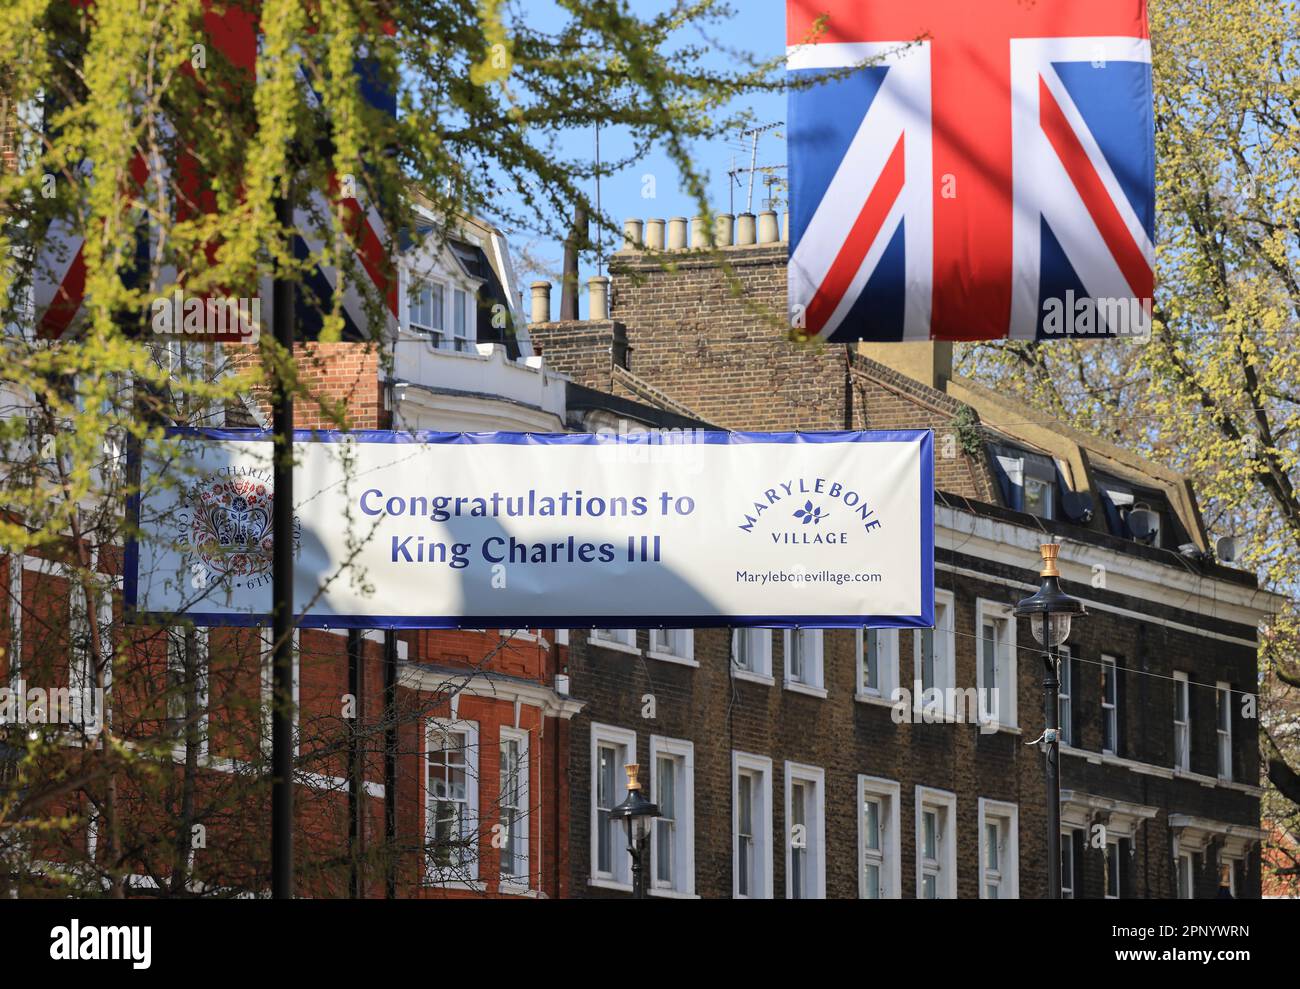 Getting ready for King Charles III's Coronation, the flags and bunting are up in Marylebone, central London, UK Stock Photo